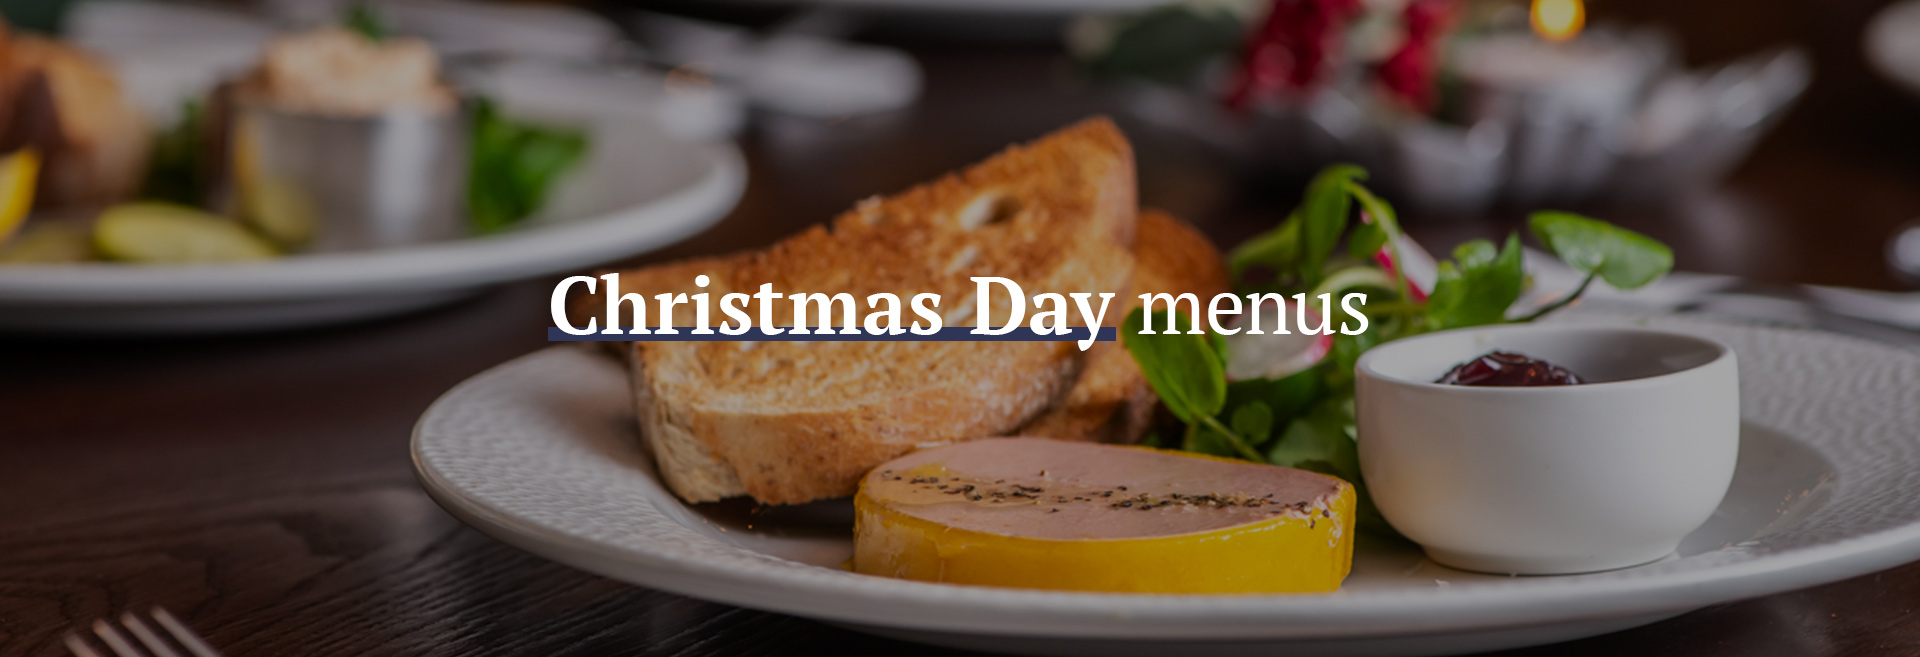 Christmas Day Menu at The Crown & Sceptre